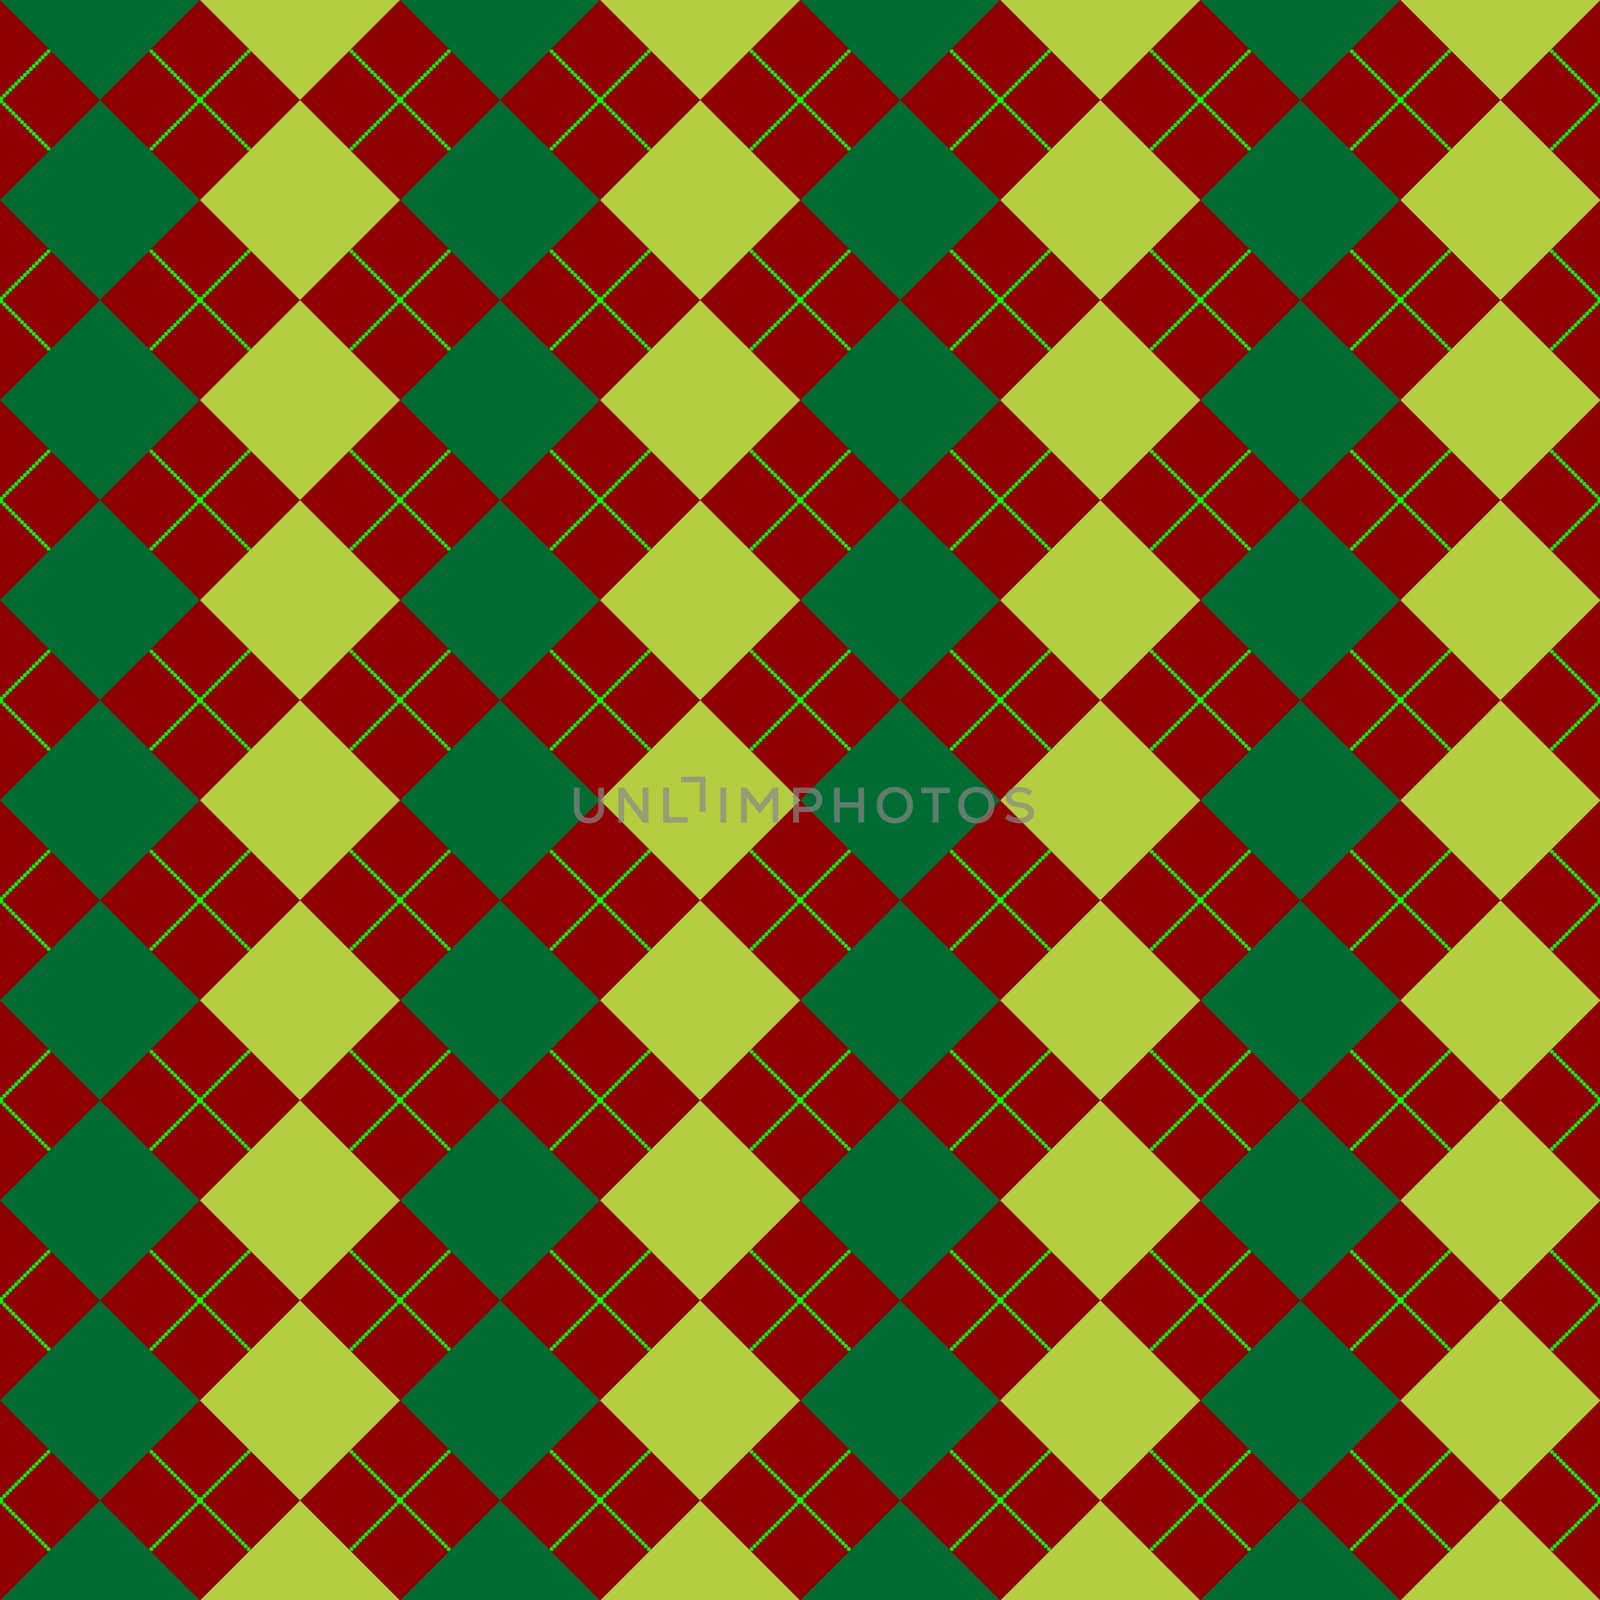 sweater texture mixed green and red, vector art illustration